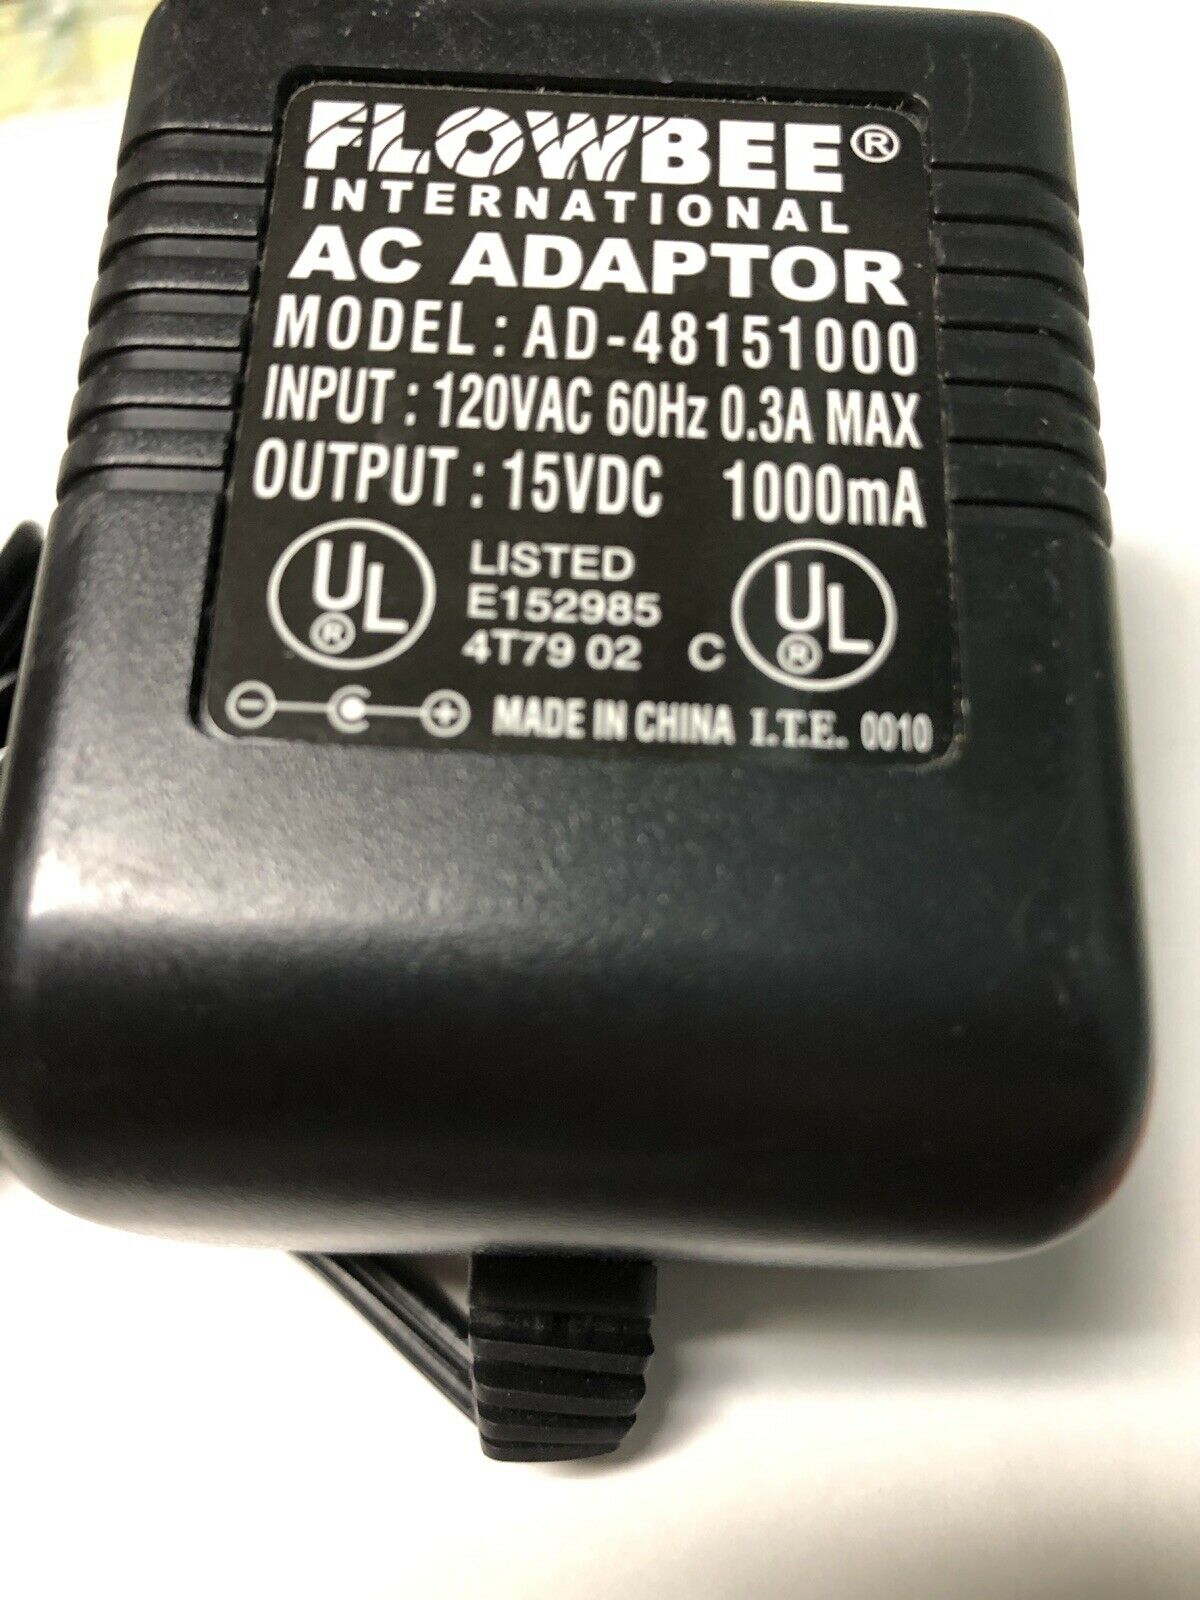 *Brand NEW*AD-48151000 Flowbee 15VDC 1000mA AC DC Adapter POWER SUPPLY